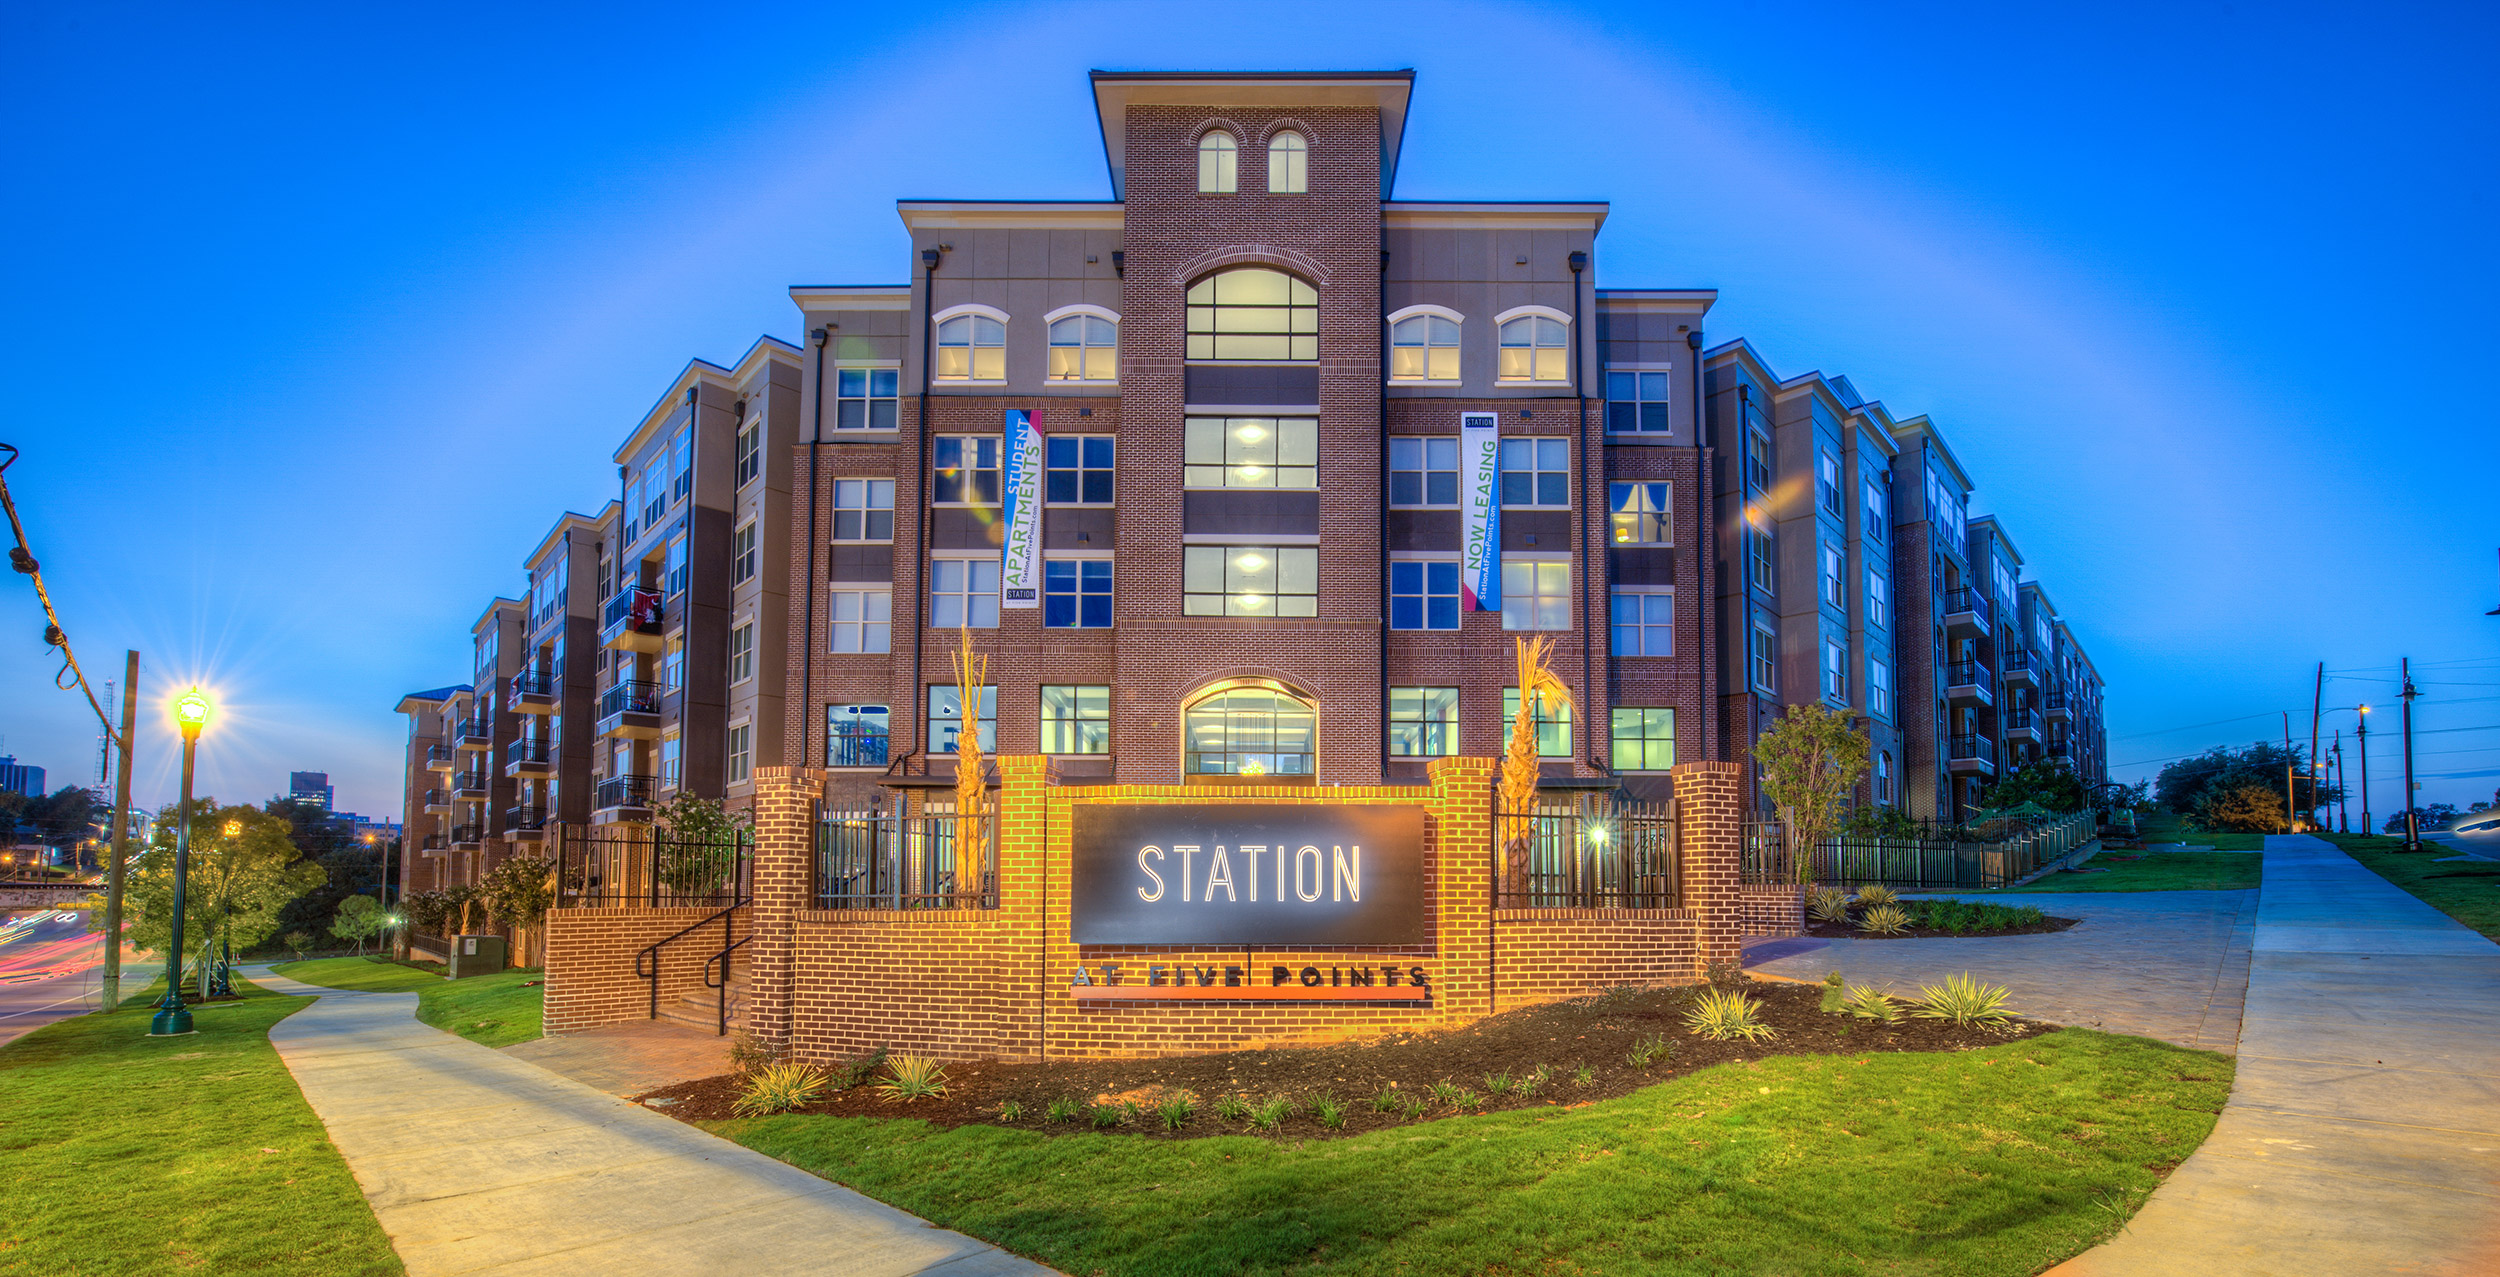 Multi level student housing at night with Station at Five Points sign